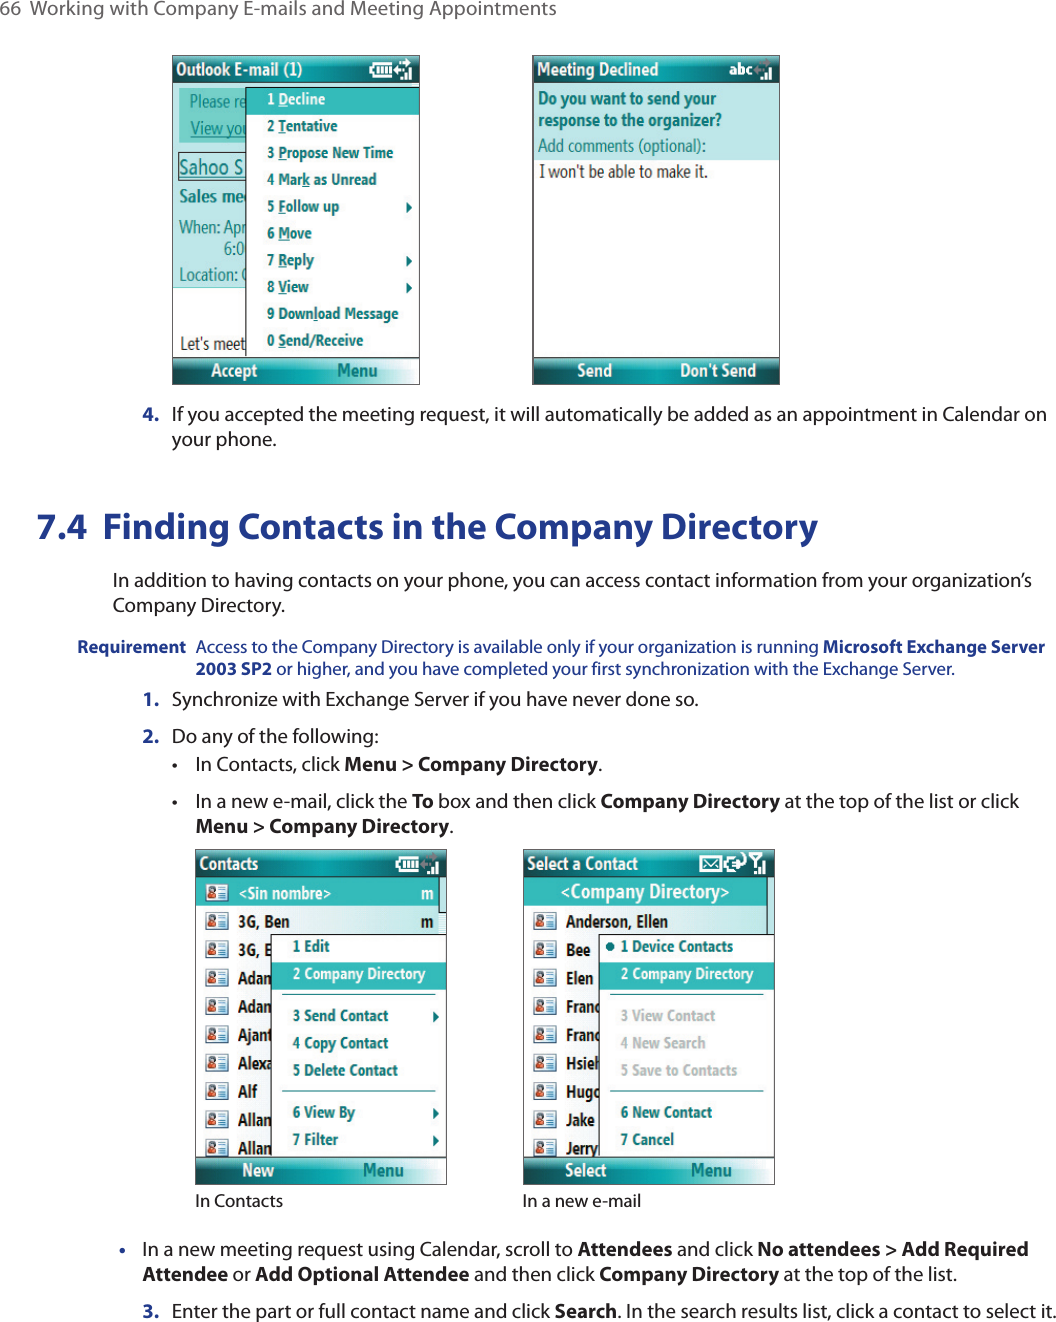 66  Working with Company E-mails and Meeting Appointments 4.  If you accepted the meeting request, it will automatically be added as an appointment in Calendar on your phone.7.4  Finding Contacts in the Company DirectoryIn addition to having contacts on your phone, you can access contact information from your organization’s Company Directory. Requirement  Access to the Company Directory is available only if your organization is running Microsoft Exchange Server 2003 SP2 or higher, and you have completed your first synchronization with the Exchange Server. 1.  Synchronize with Exchange Server if you have never done so.2.  Do any of the following:•  In Contacts, click Menu &gt; Company Directory.•  In a new e-mail, click the To box and then click Company Directory at the top of the list or click Menu &gt; Company Directory.              In Contacts In a new e-mail•  In a new meeting request using Calendar, scroll to Attendees and click No attendees &gt; Add Required Attendee or Add Optional Attendee and then click Company Directory at the top of the list.3.  Enter the part or full contact name and click Search. In the search results list, click a contact to select it.